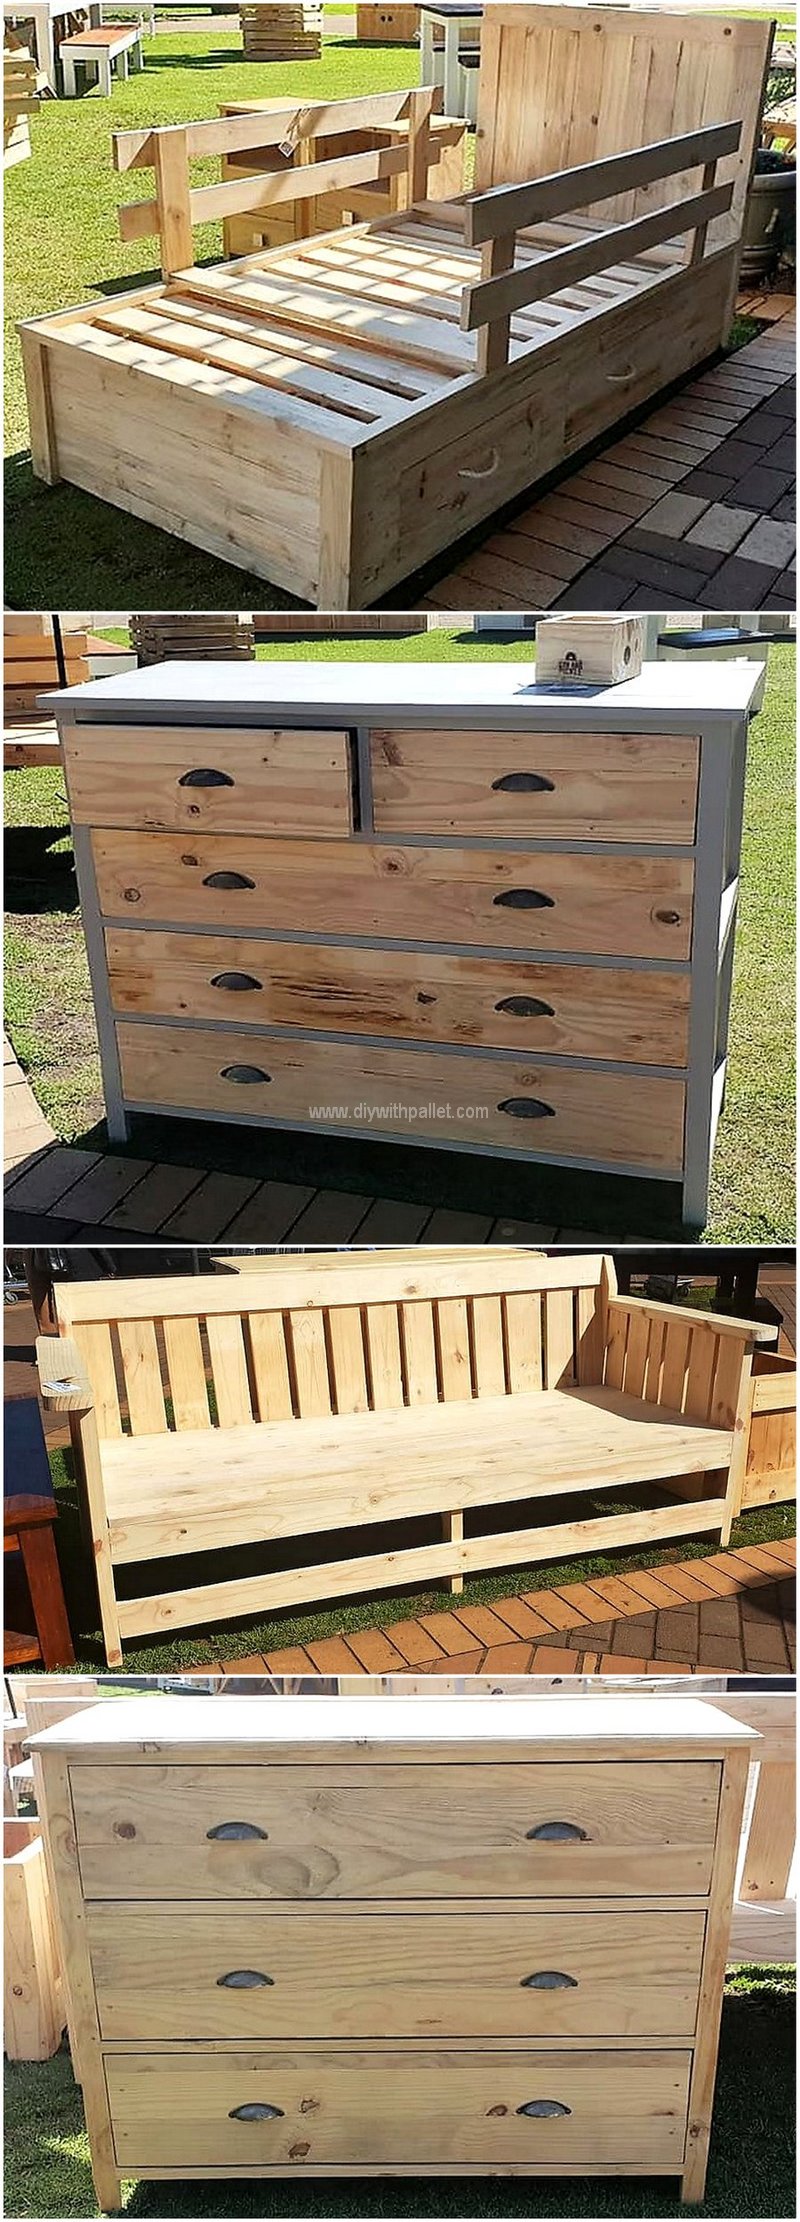 recycled pallets wooden furniture